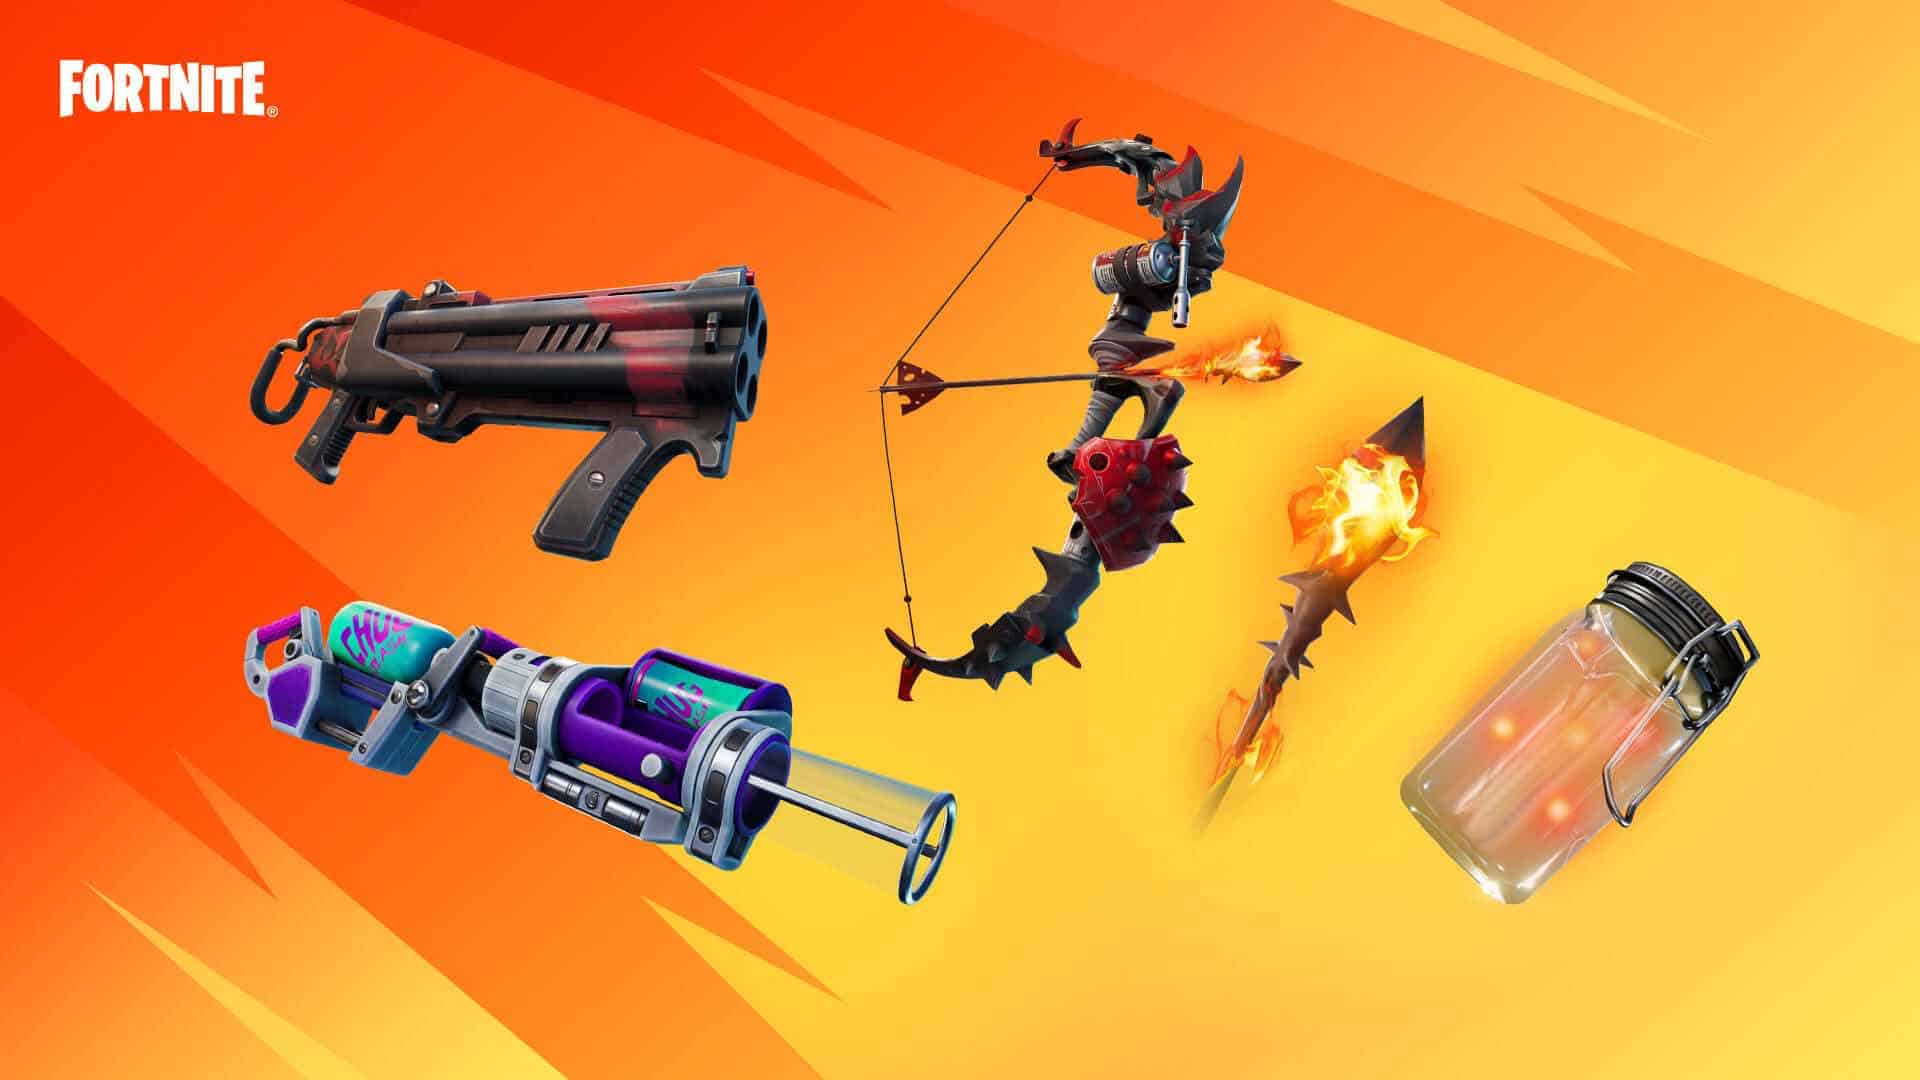 Fortnite v21.51 patch notes – Fire With Fire week, new purchase options and more